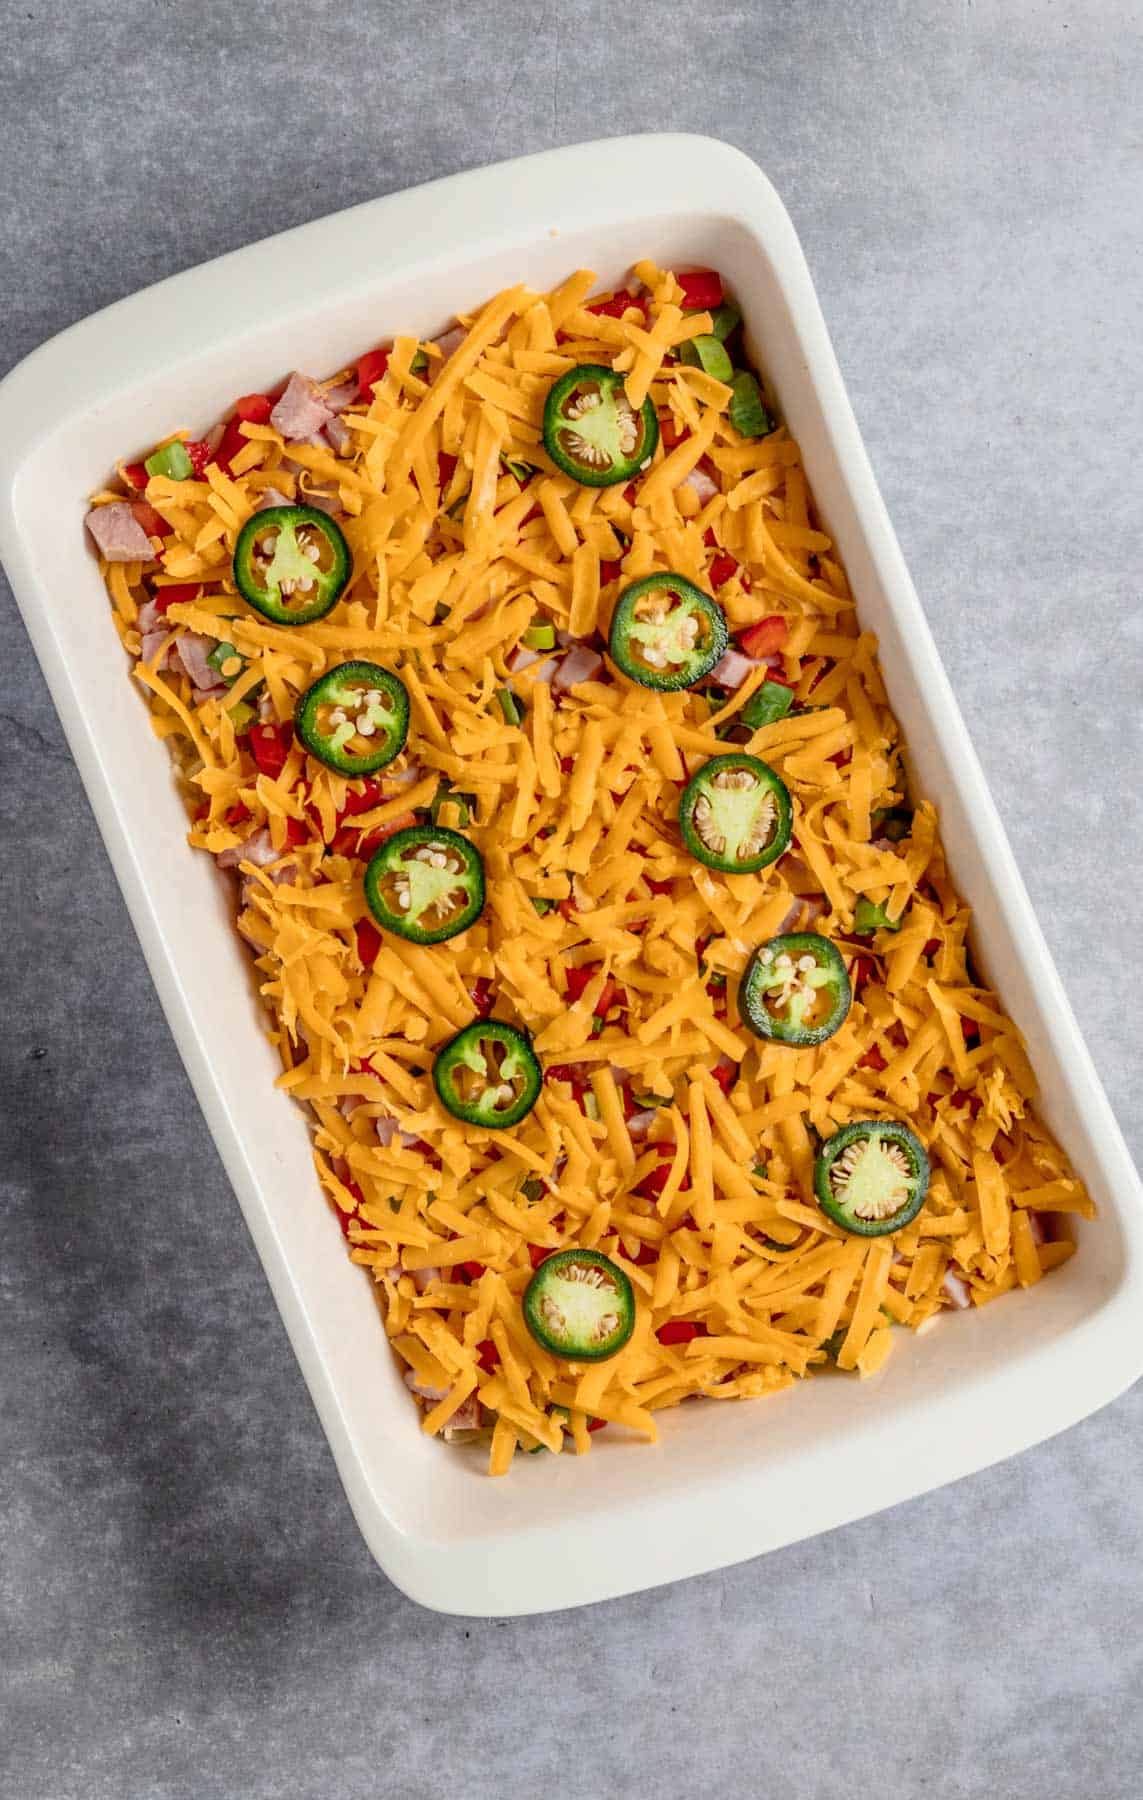 cheese and jalapeno added to hashbrown casserole dish